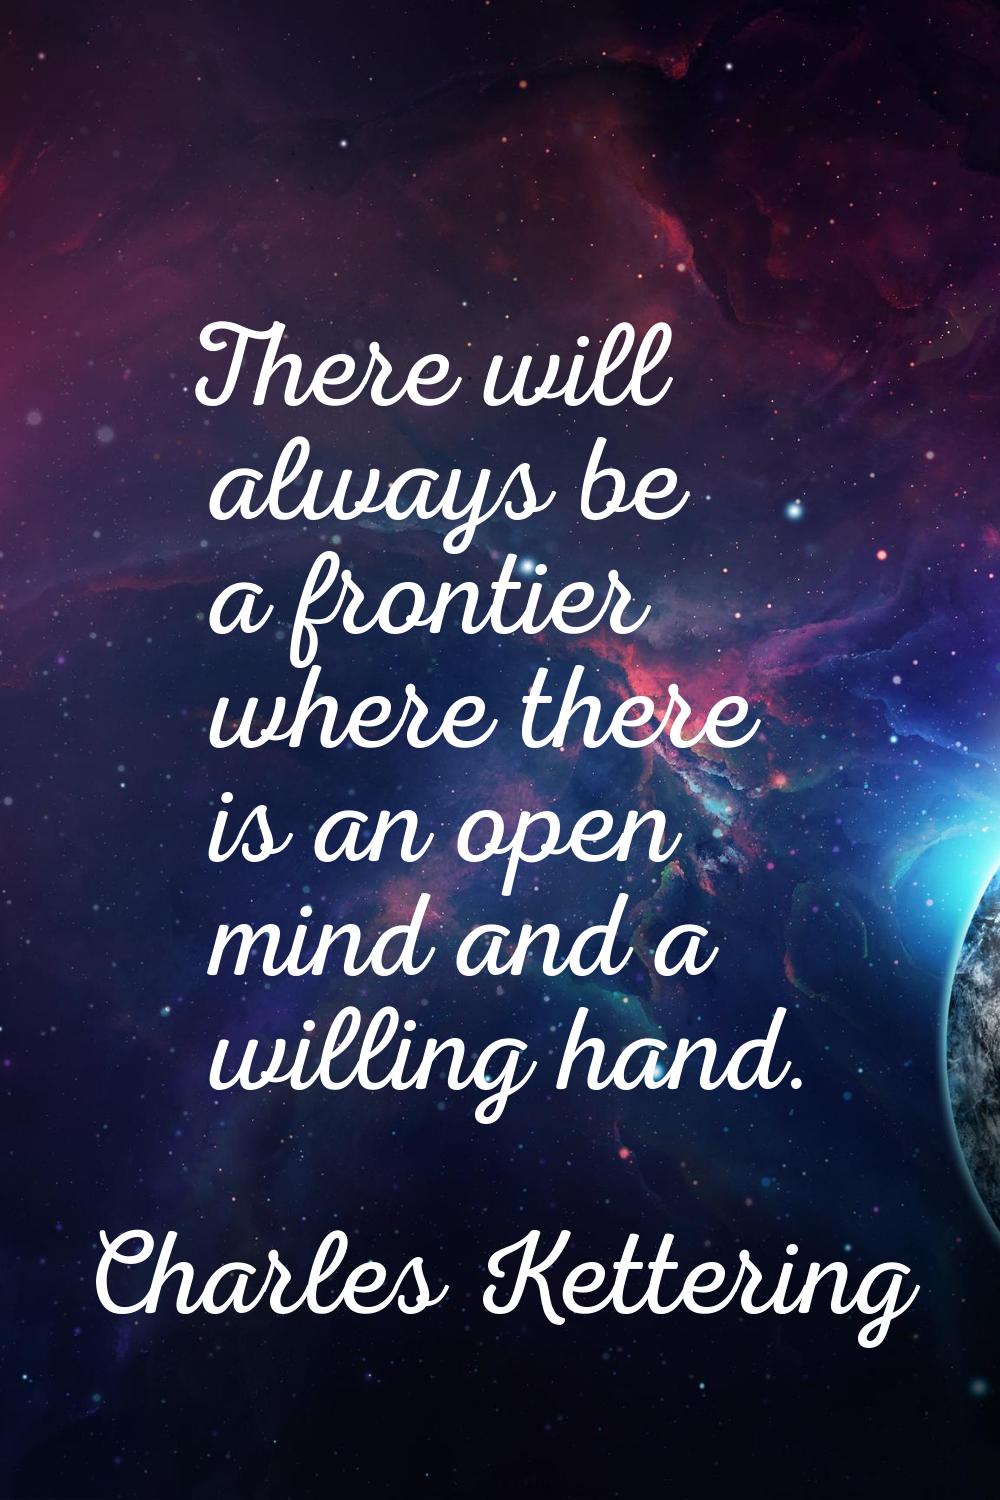 There will always be a frontier where there is an open mind and a willing hand.